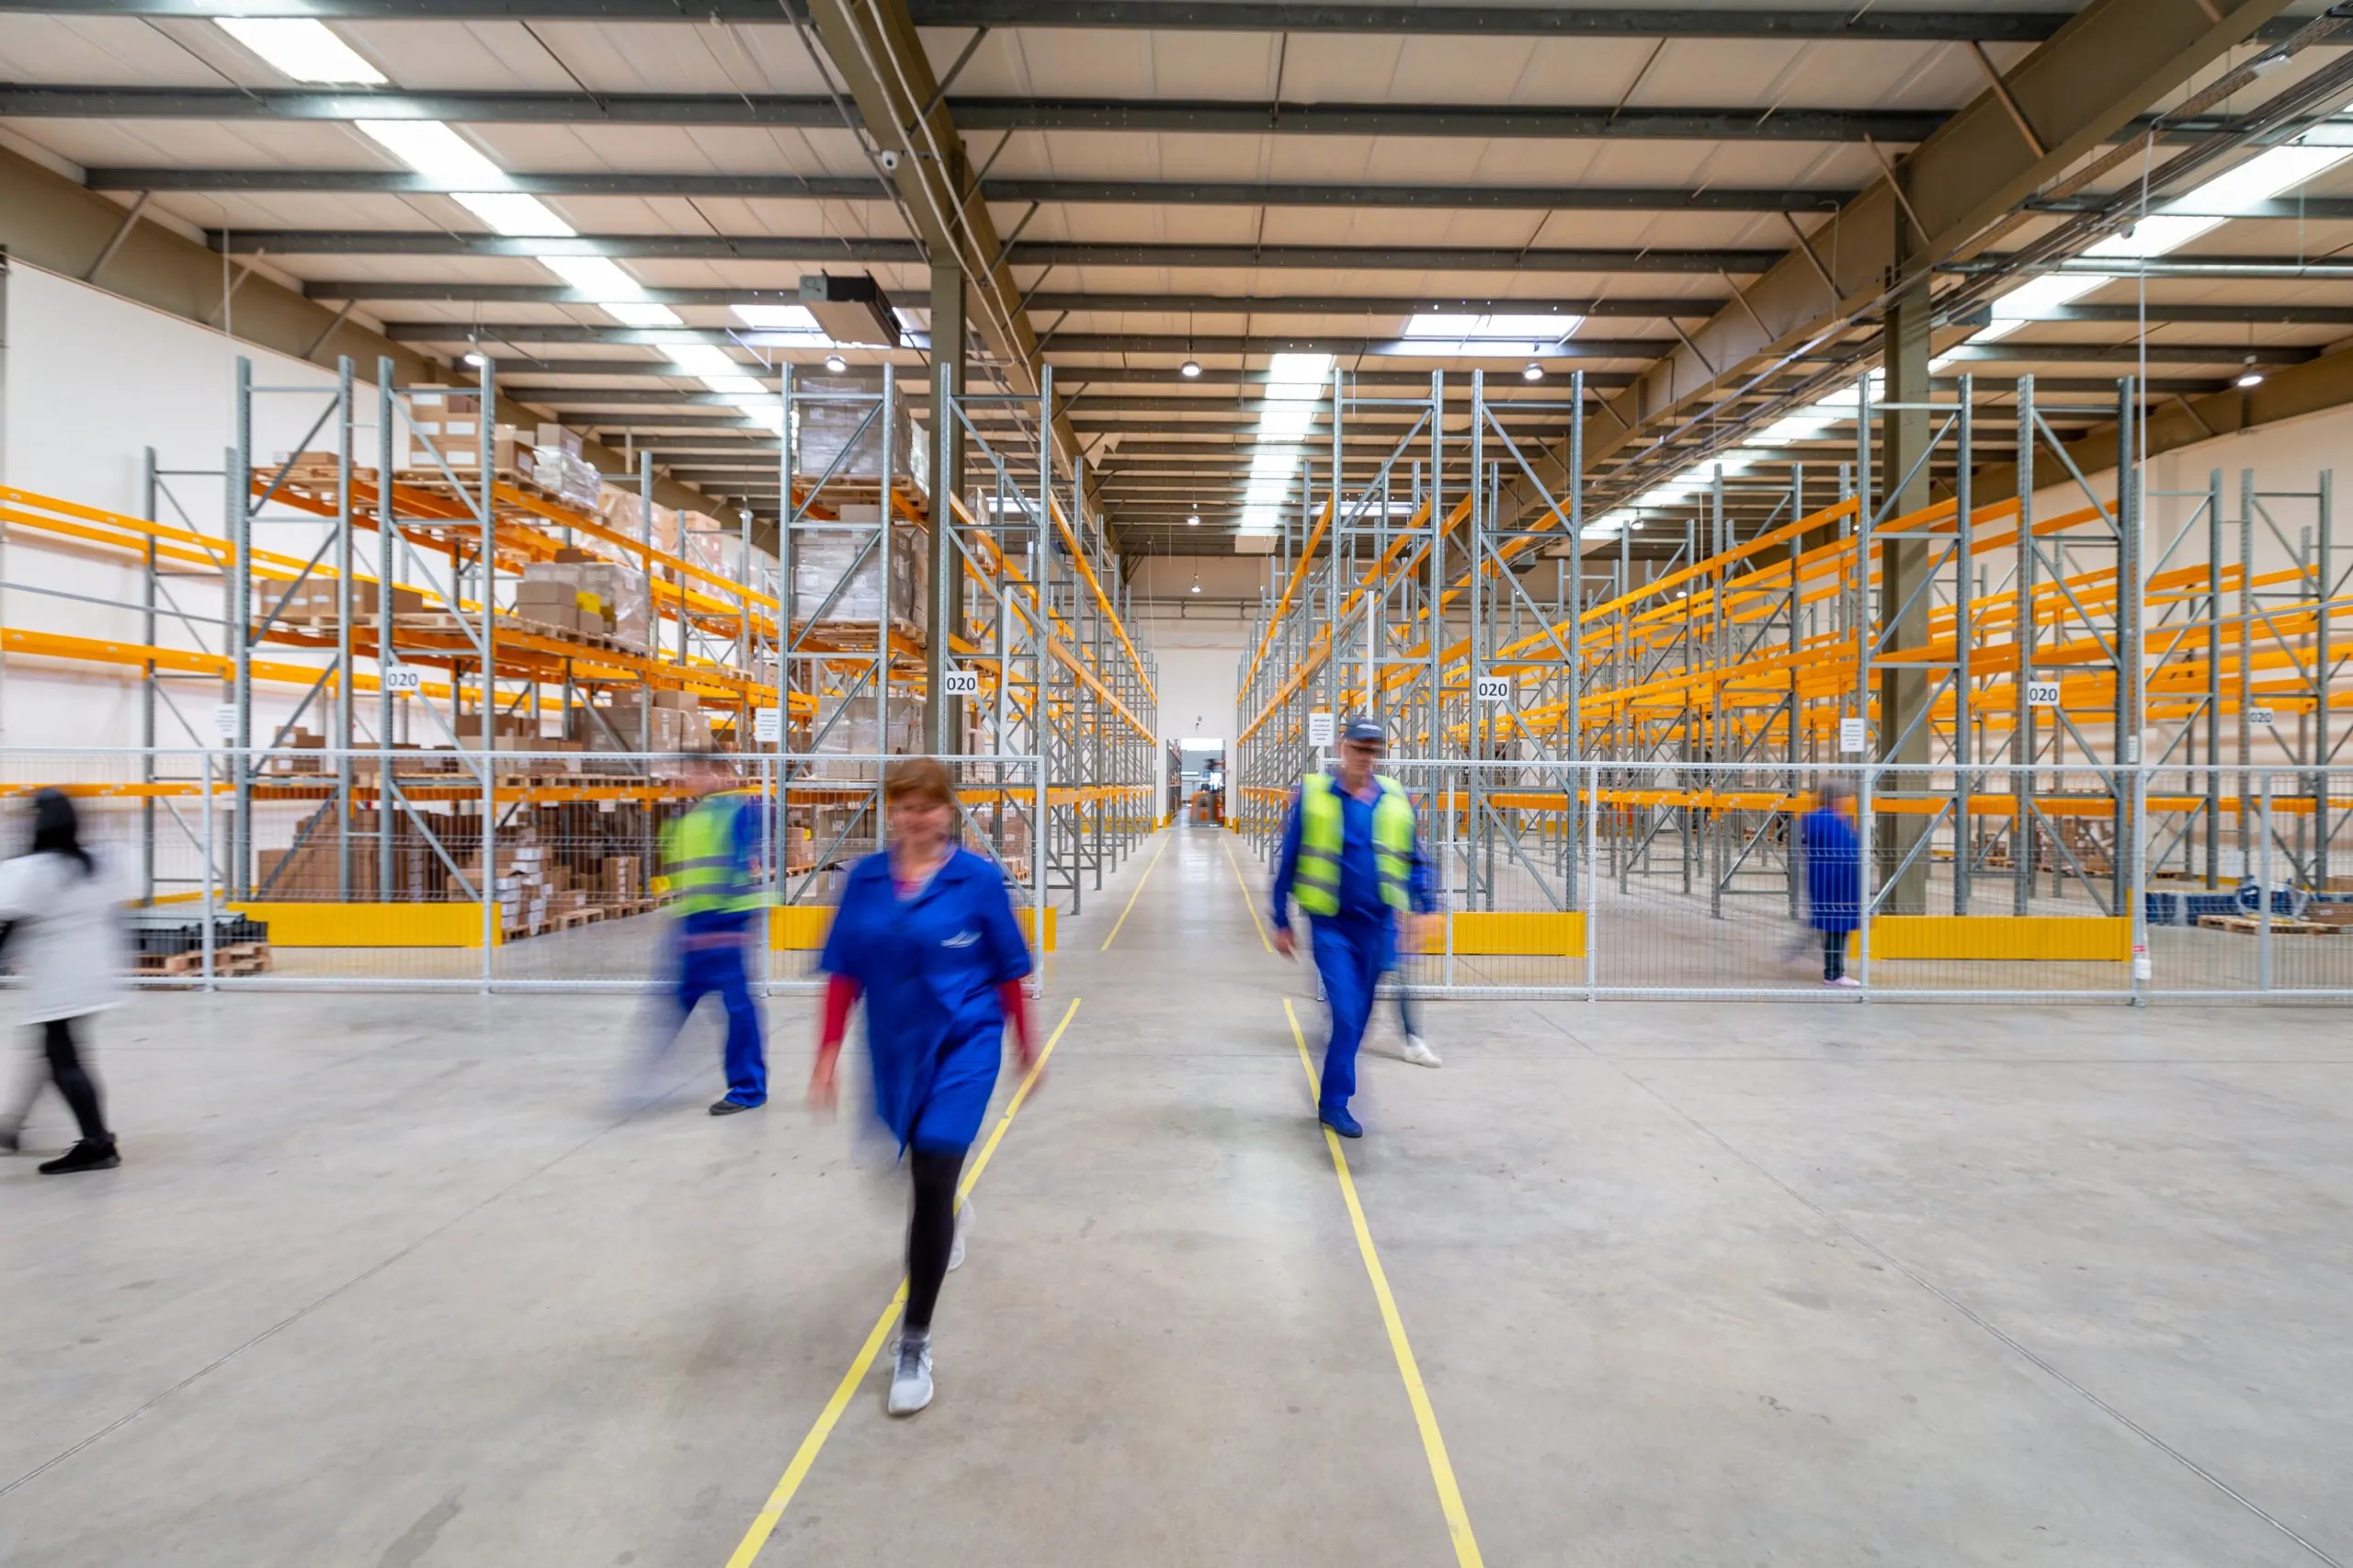 Warehouse with employees that are protected by security systems